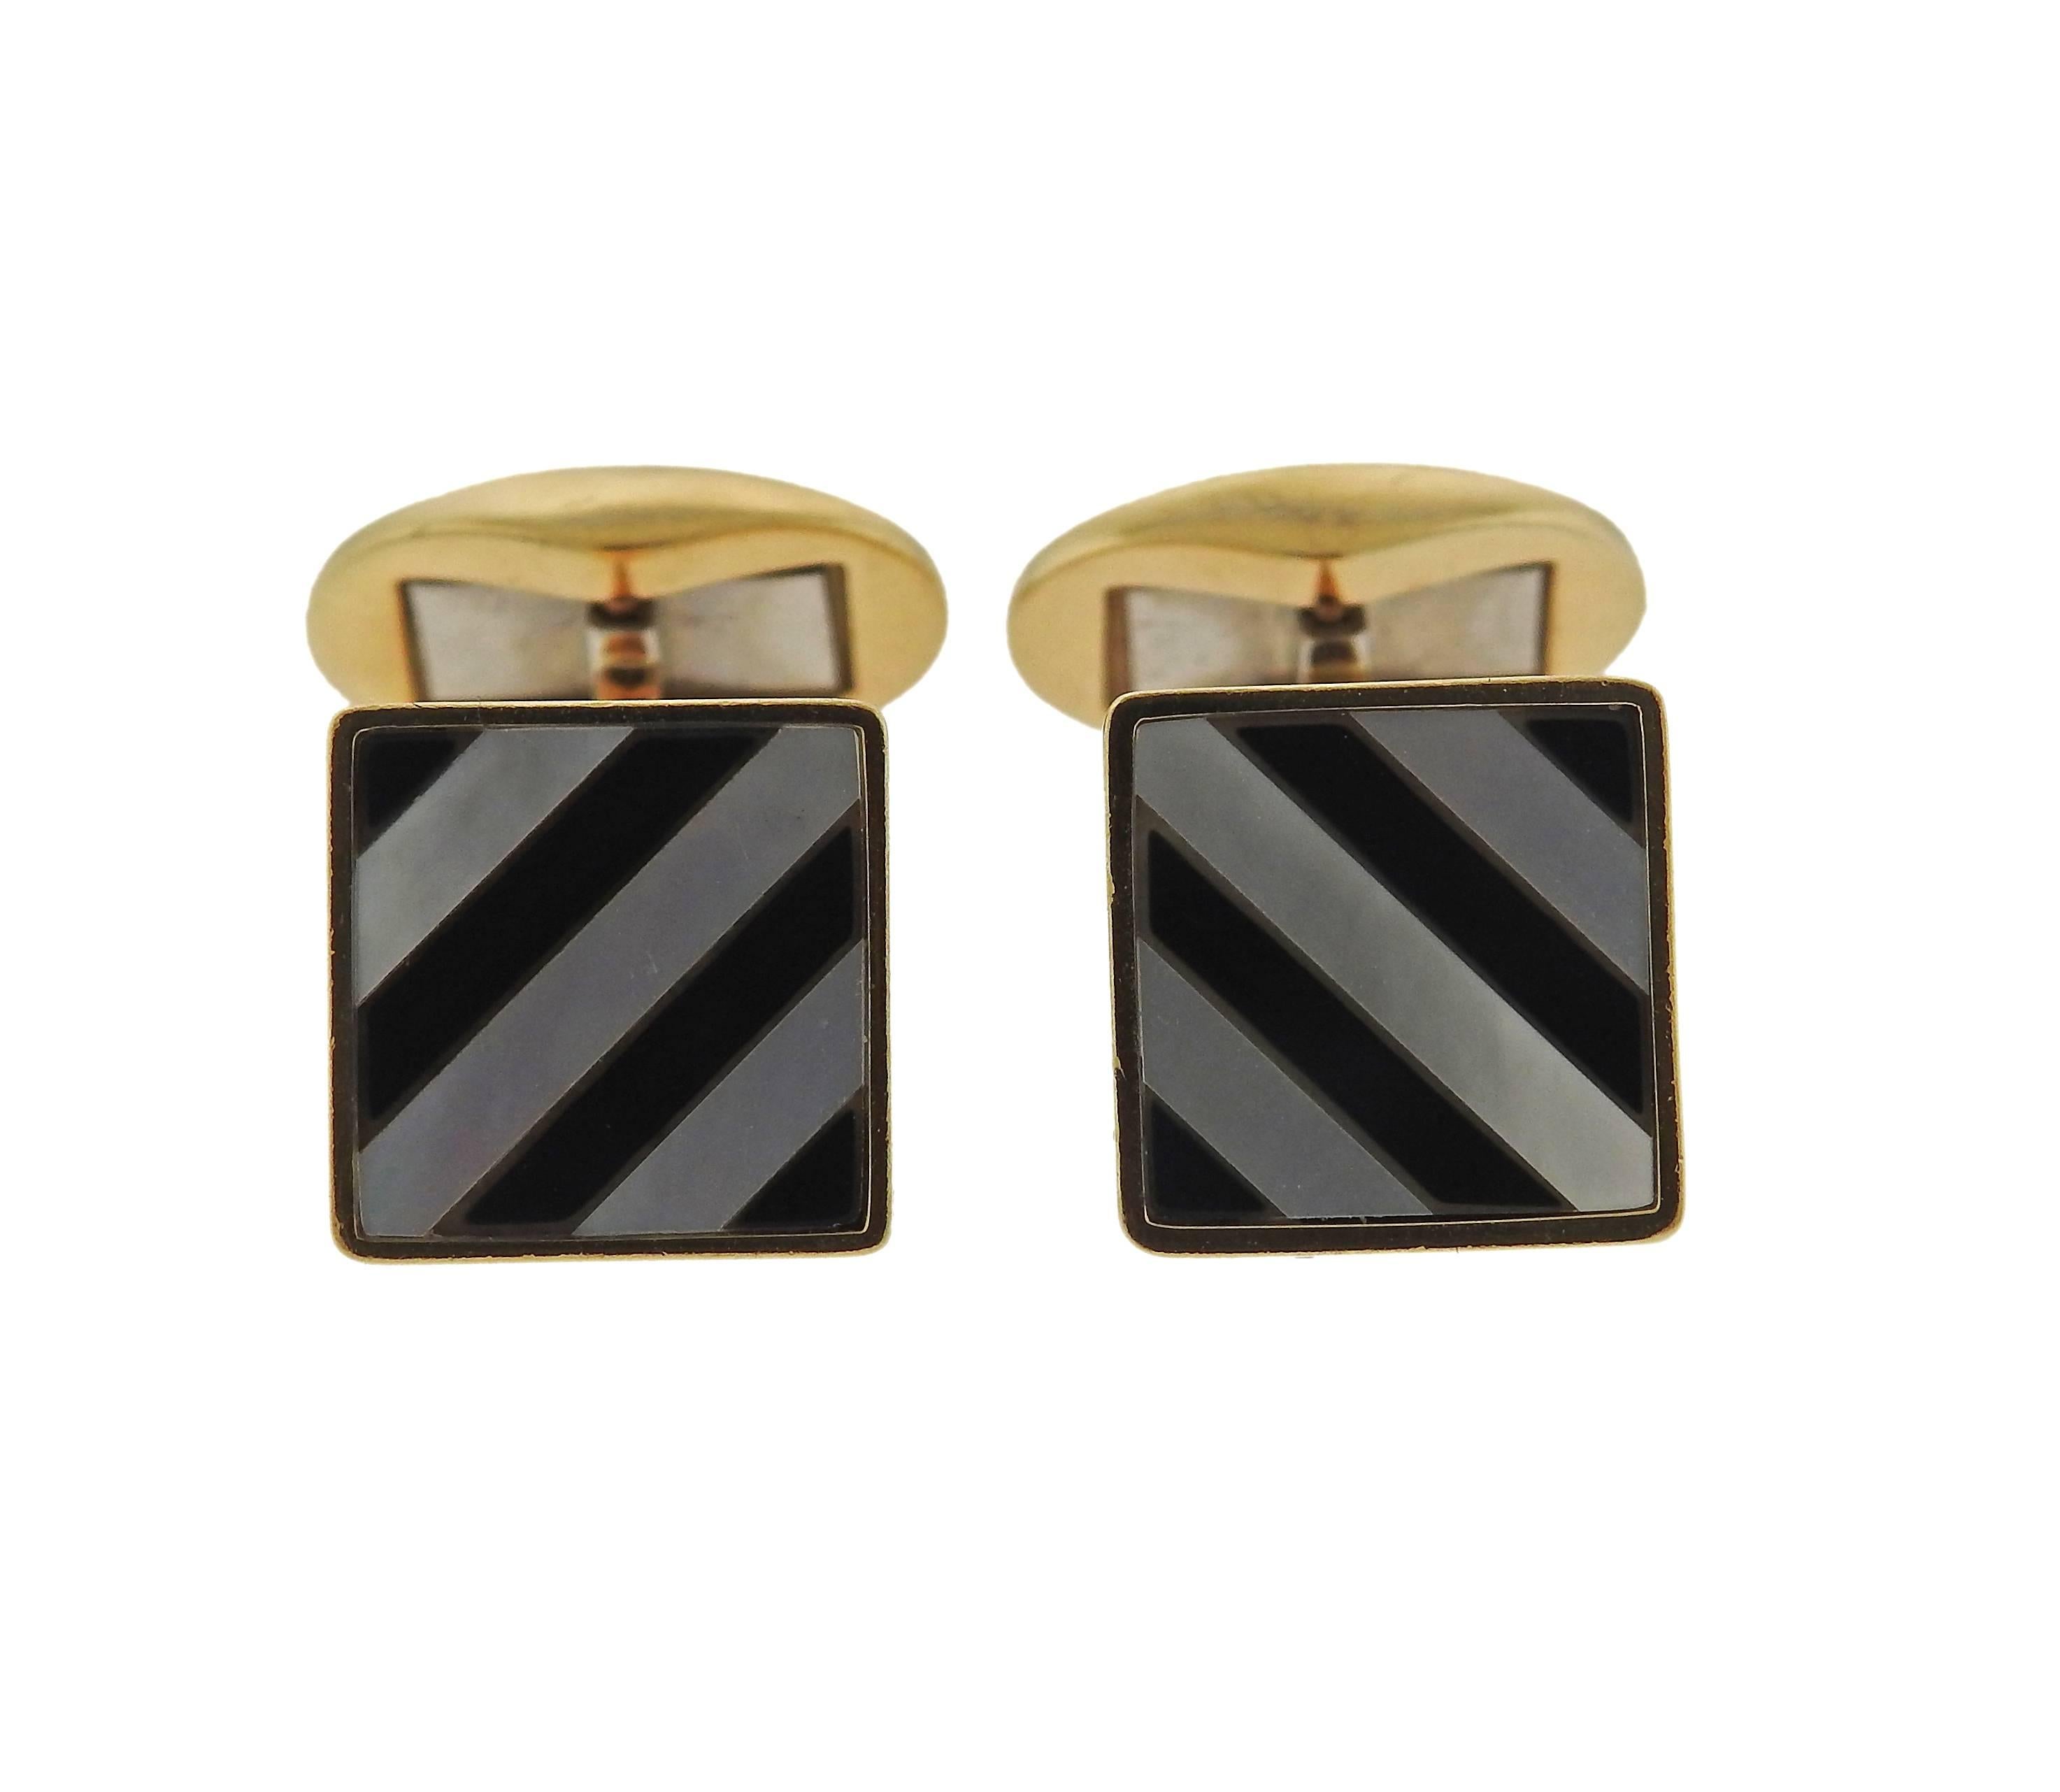 Pair of 18k yellow gold cufflinks, crafted by Tiffany & Co, decorated with onyx and mother of pearl inlay top. Each top measures 12.8mm x 12.8mm. Marked: Tiffany & Co, 18k, W-Germany. Weight - 14.7 grams